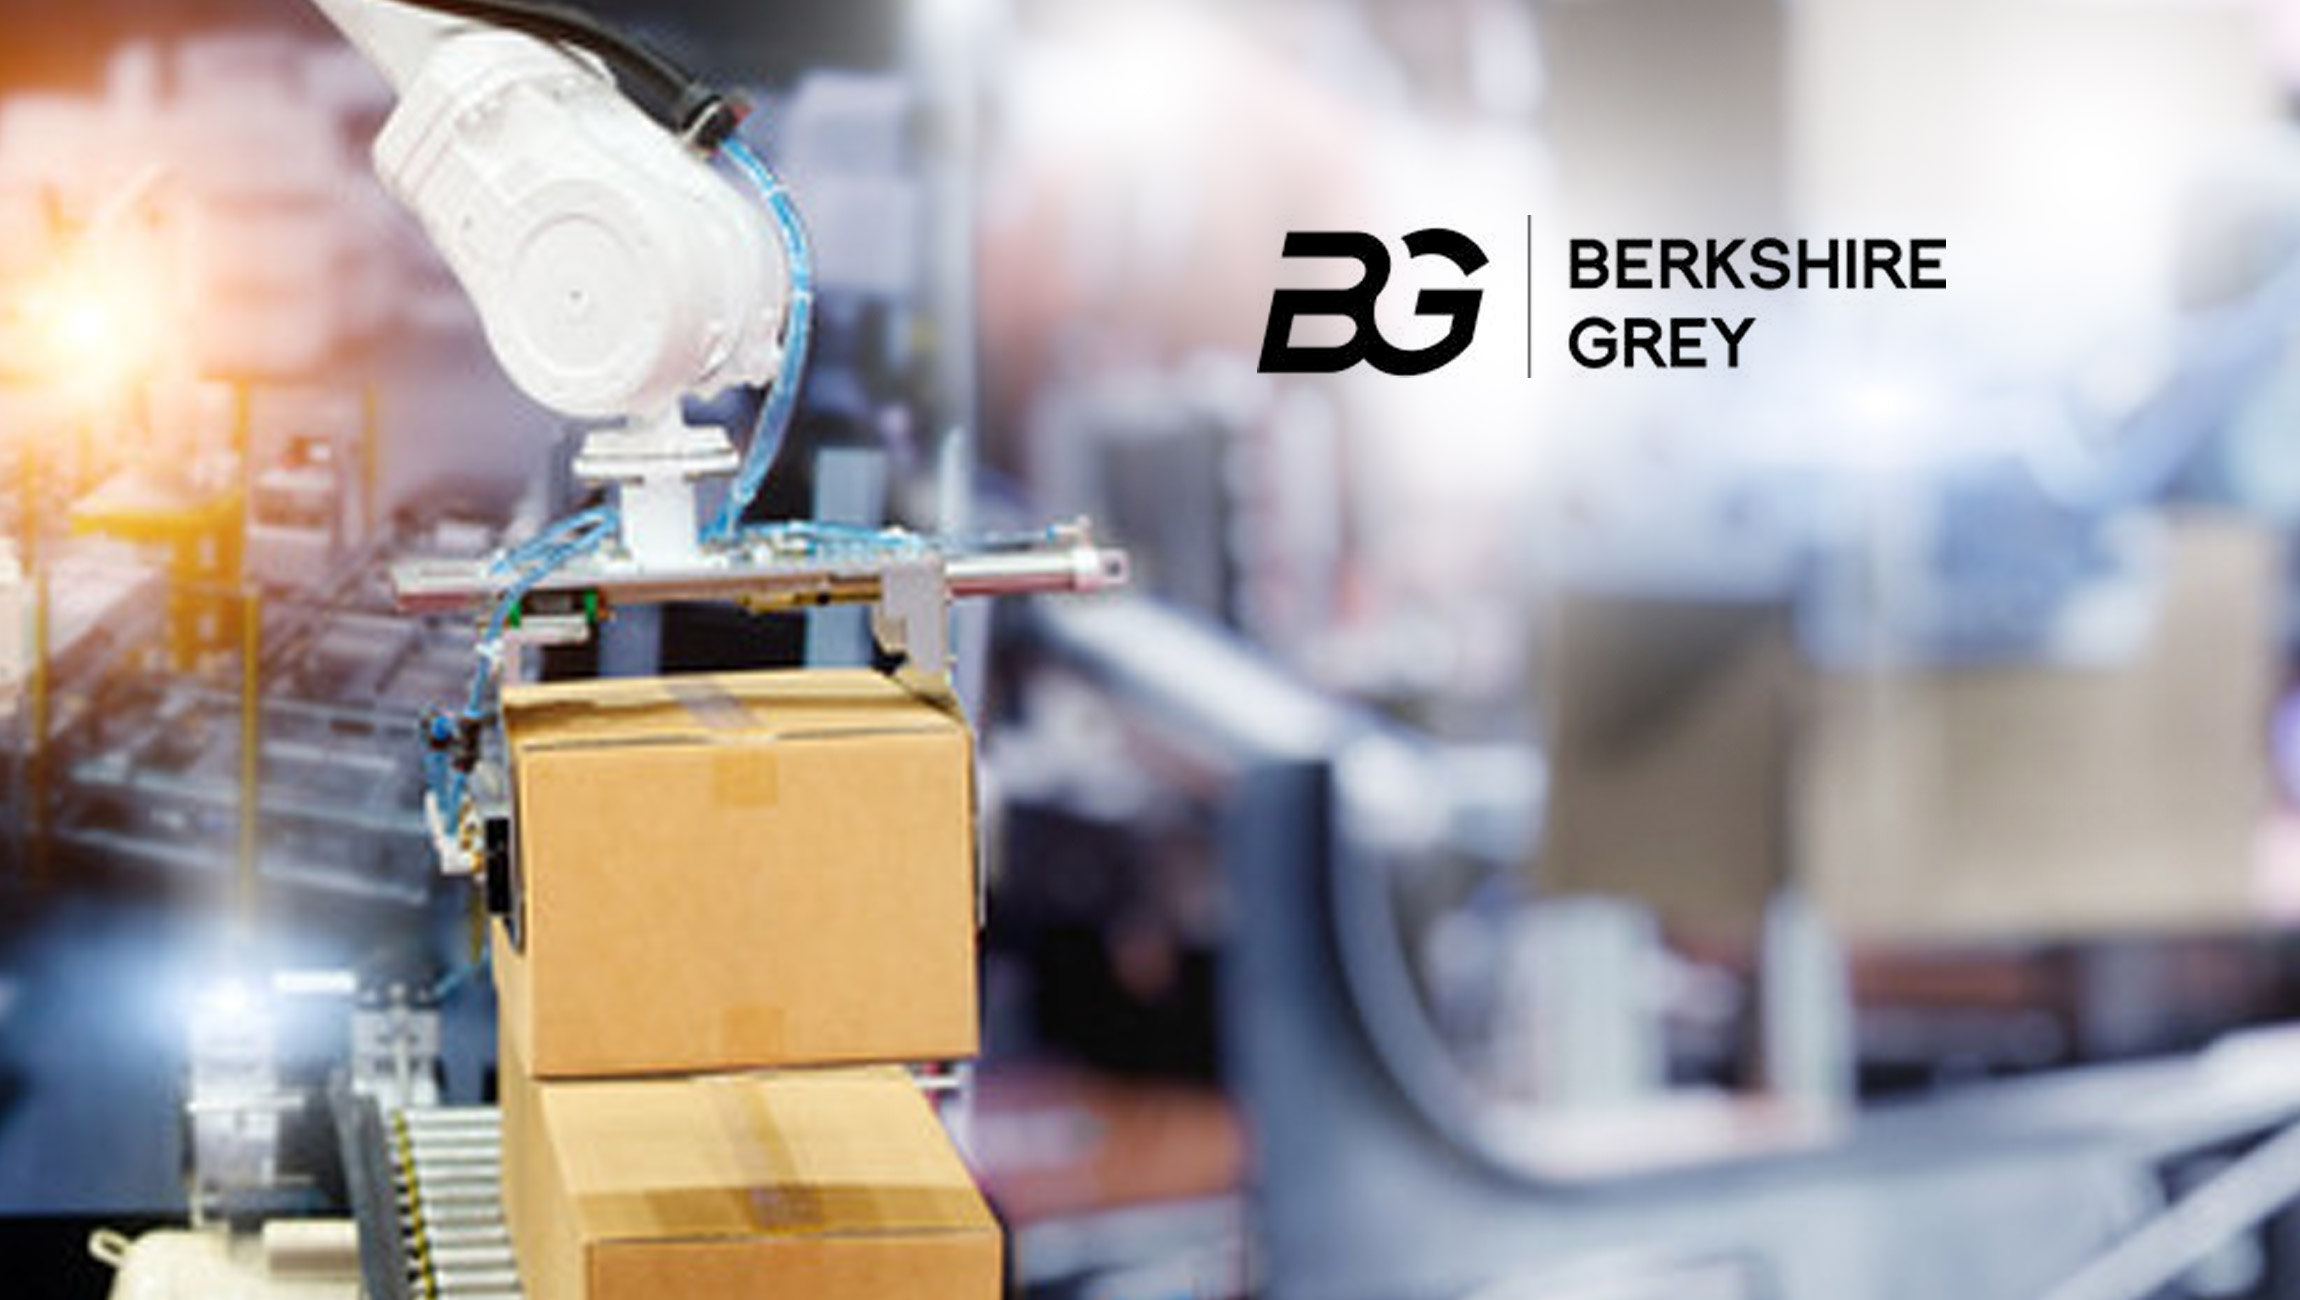 Ecommerce and Package Handling Companies Leverage Berkshire Grey AI-enabled Robotic Solutions to Meet Surging Demand Despite Labor Shortages